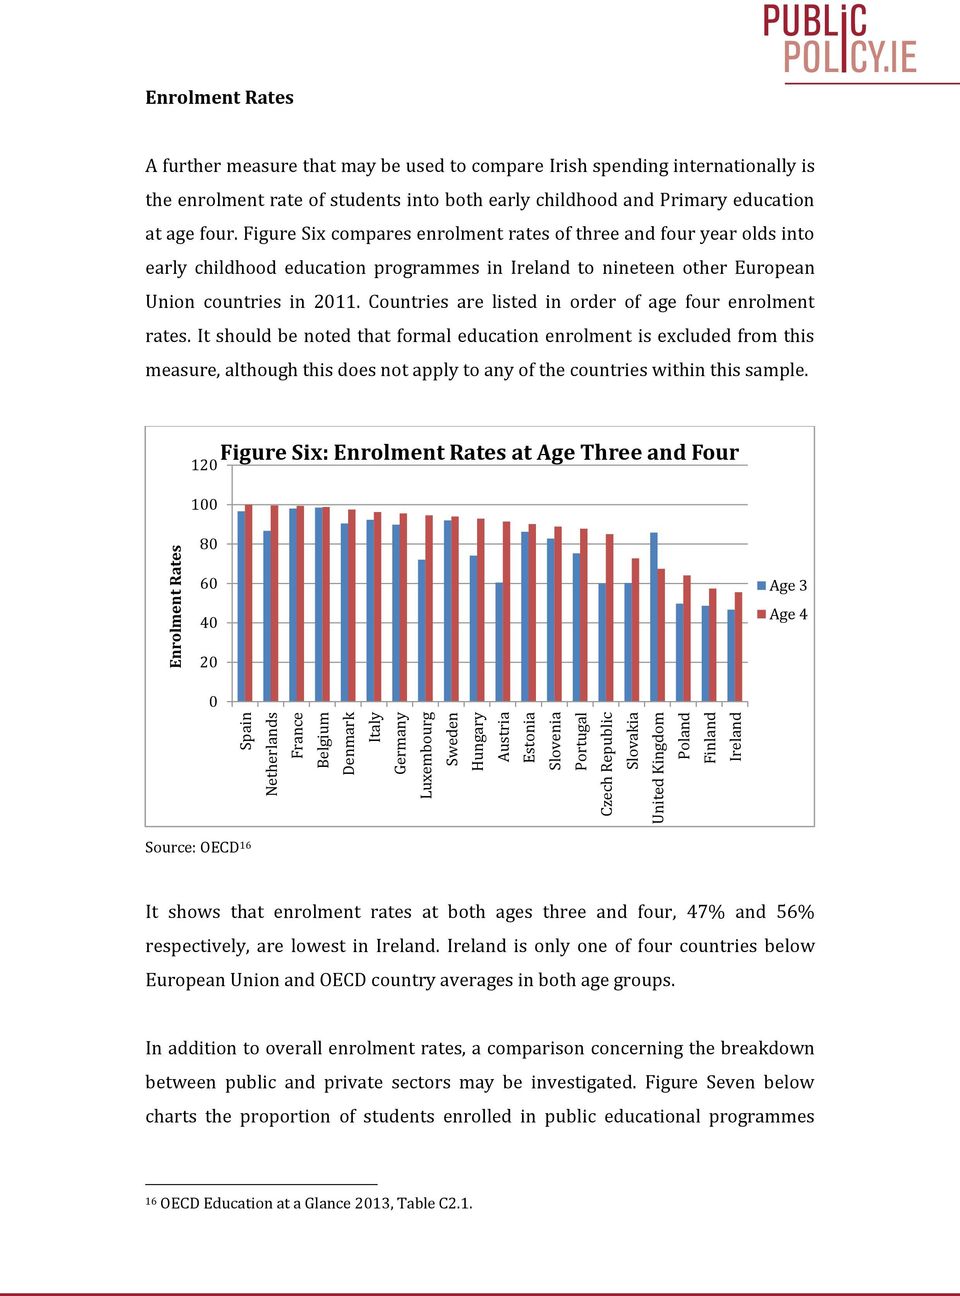 Figure Six compares enrolment rates of three and four year olds into early childhood education programmes in Ireland to nineteen other European Union countries in 211.